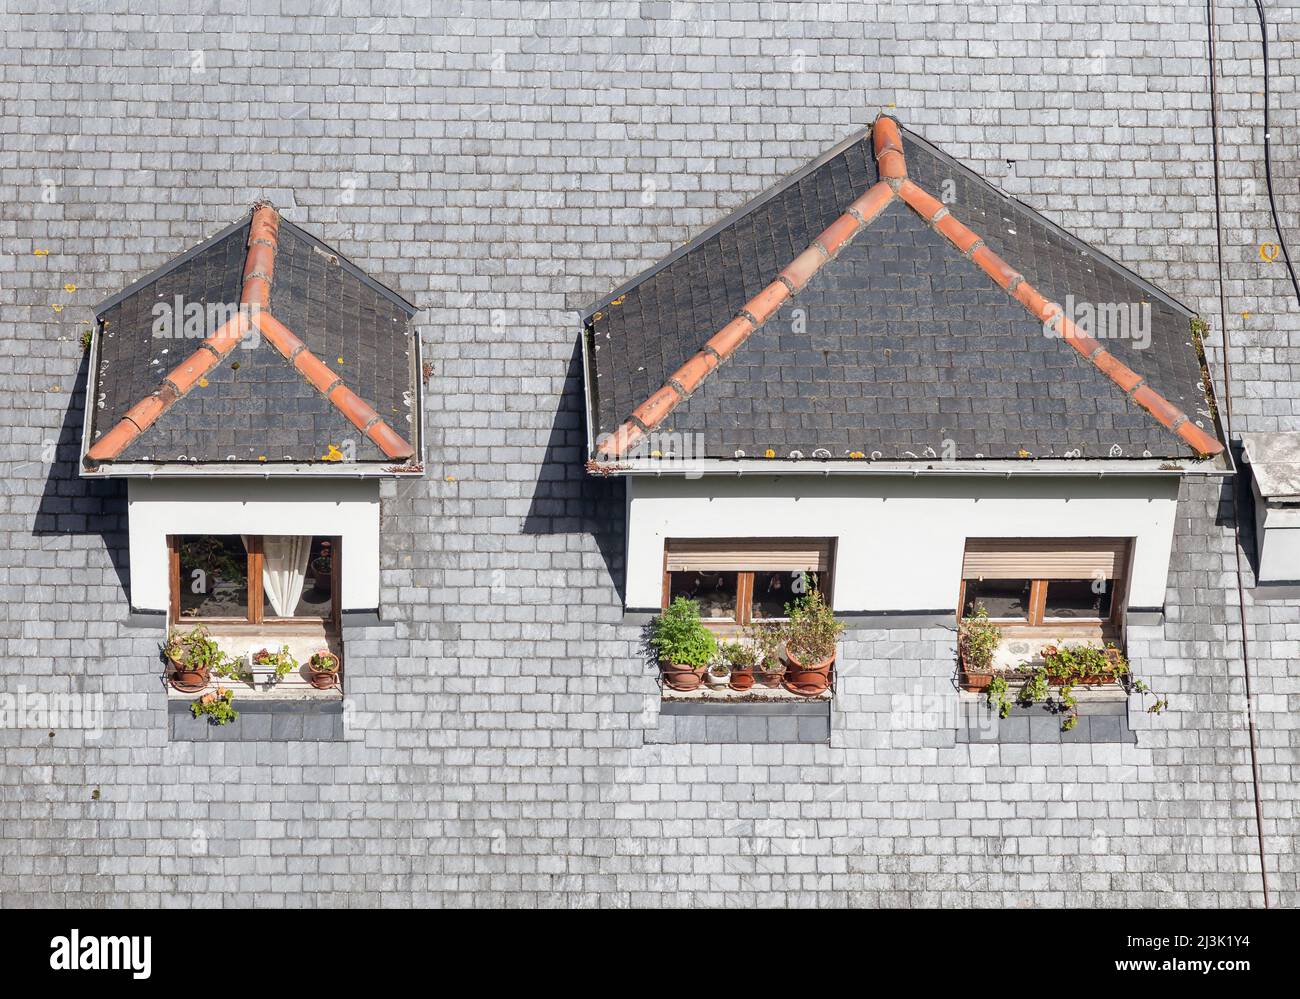 Dormer windows on the roof of a building Stock Photo